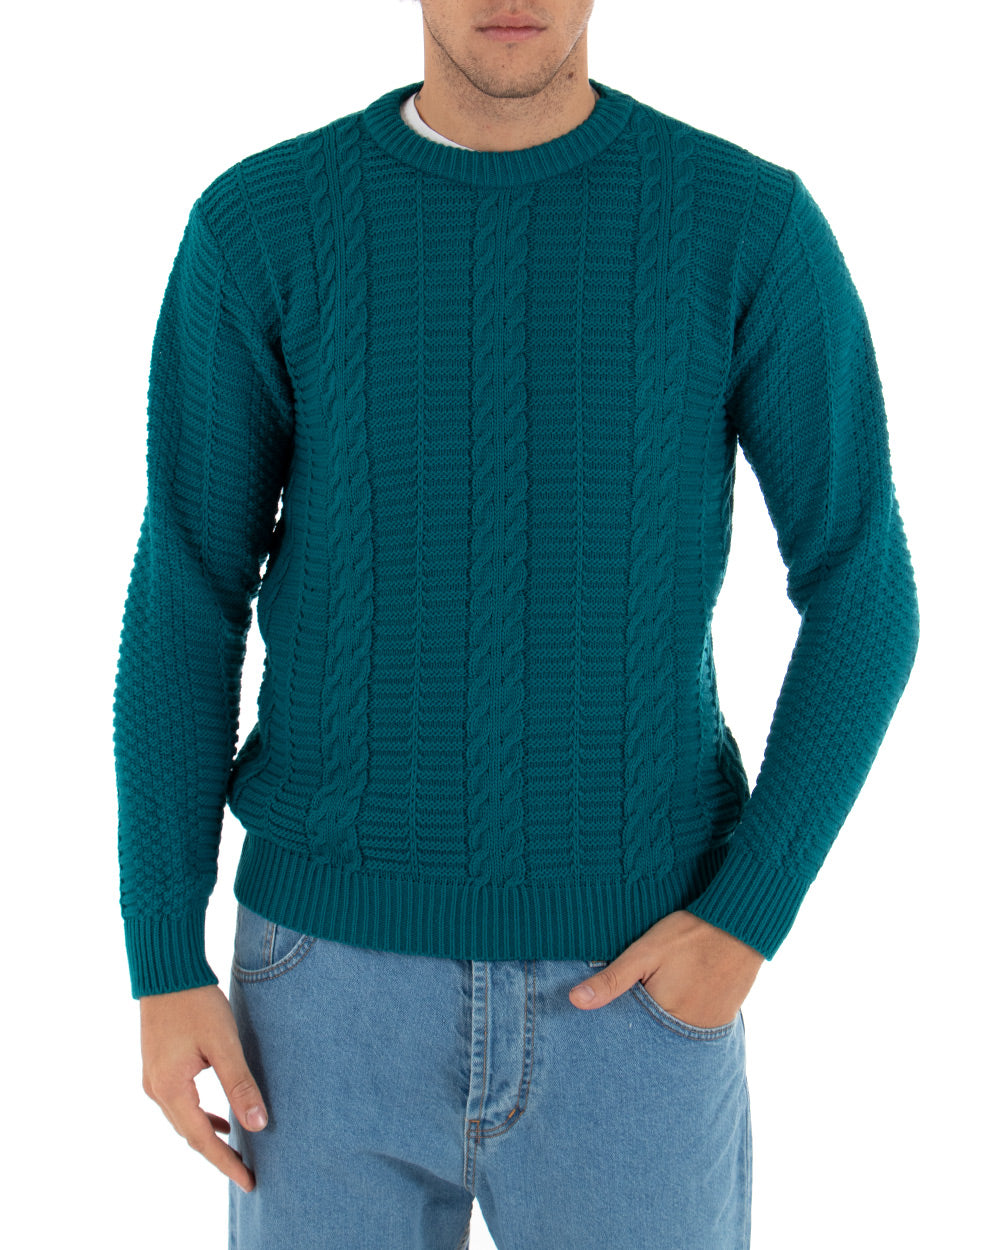 Paul Barrell Men's Woven Pullover Solid Color Petrol Casual Crewneck Sweater GIOSAL